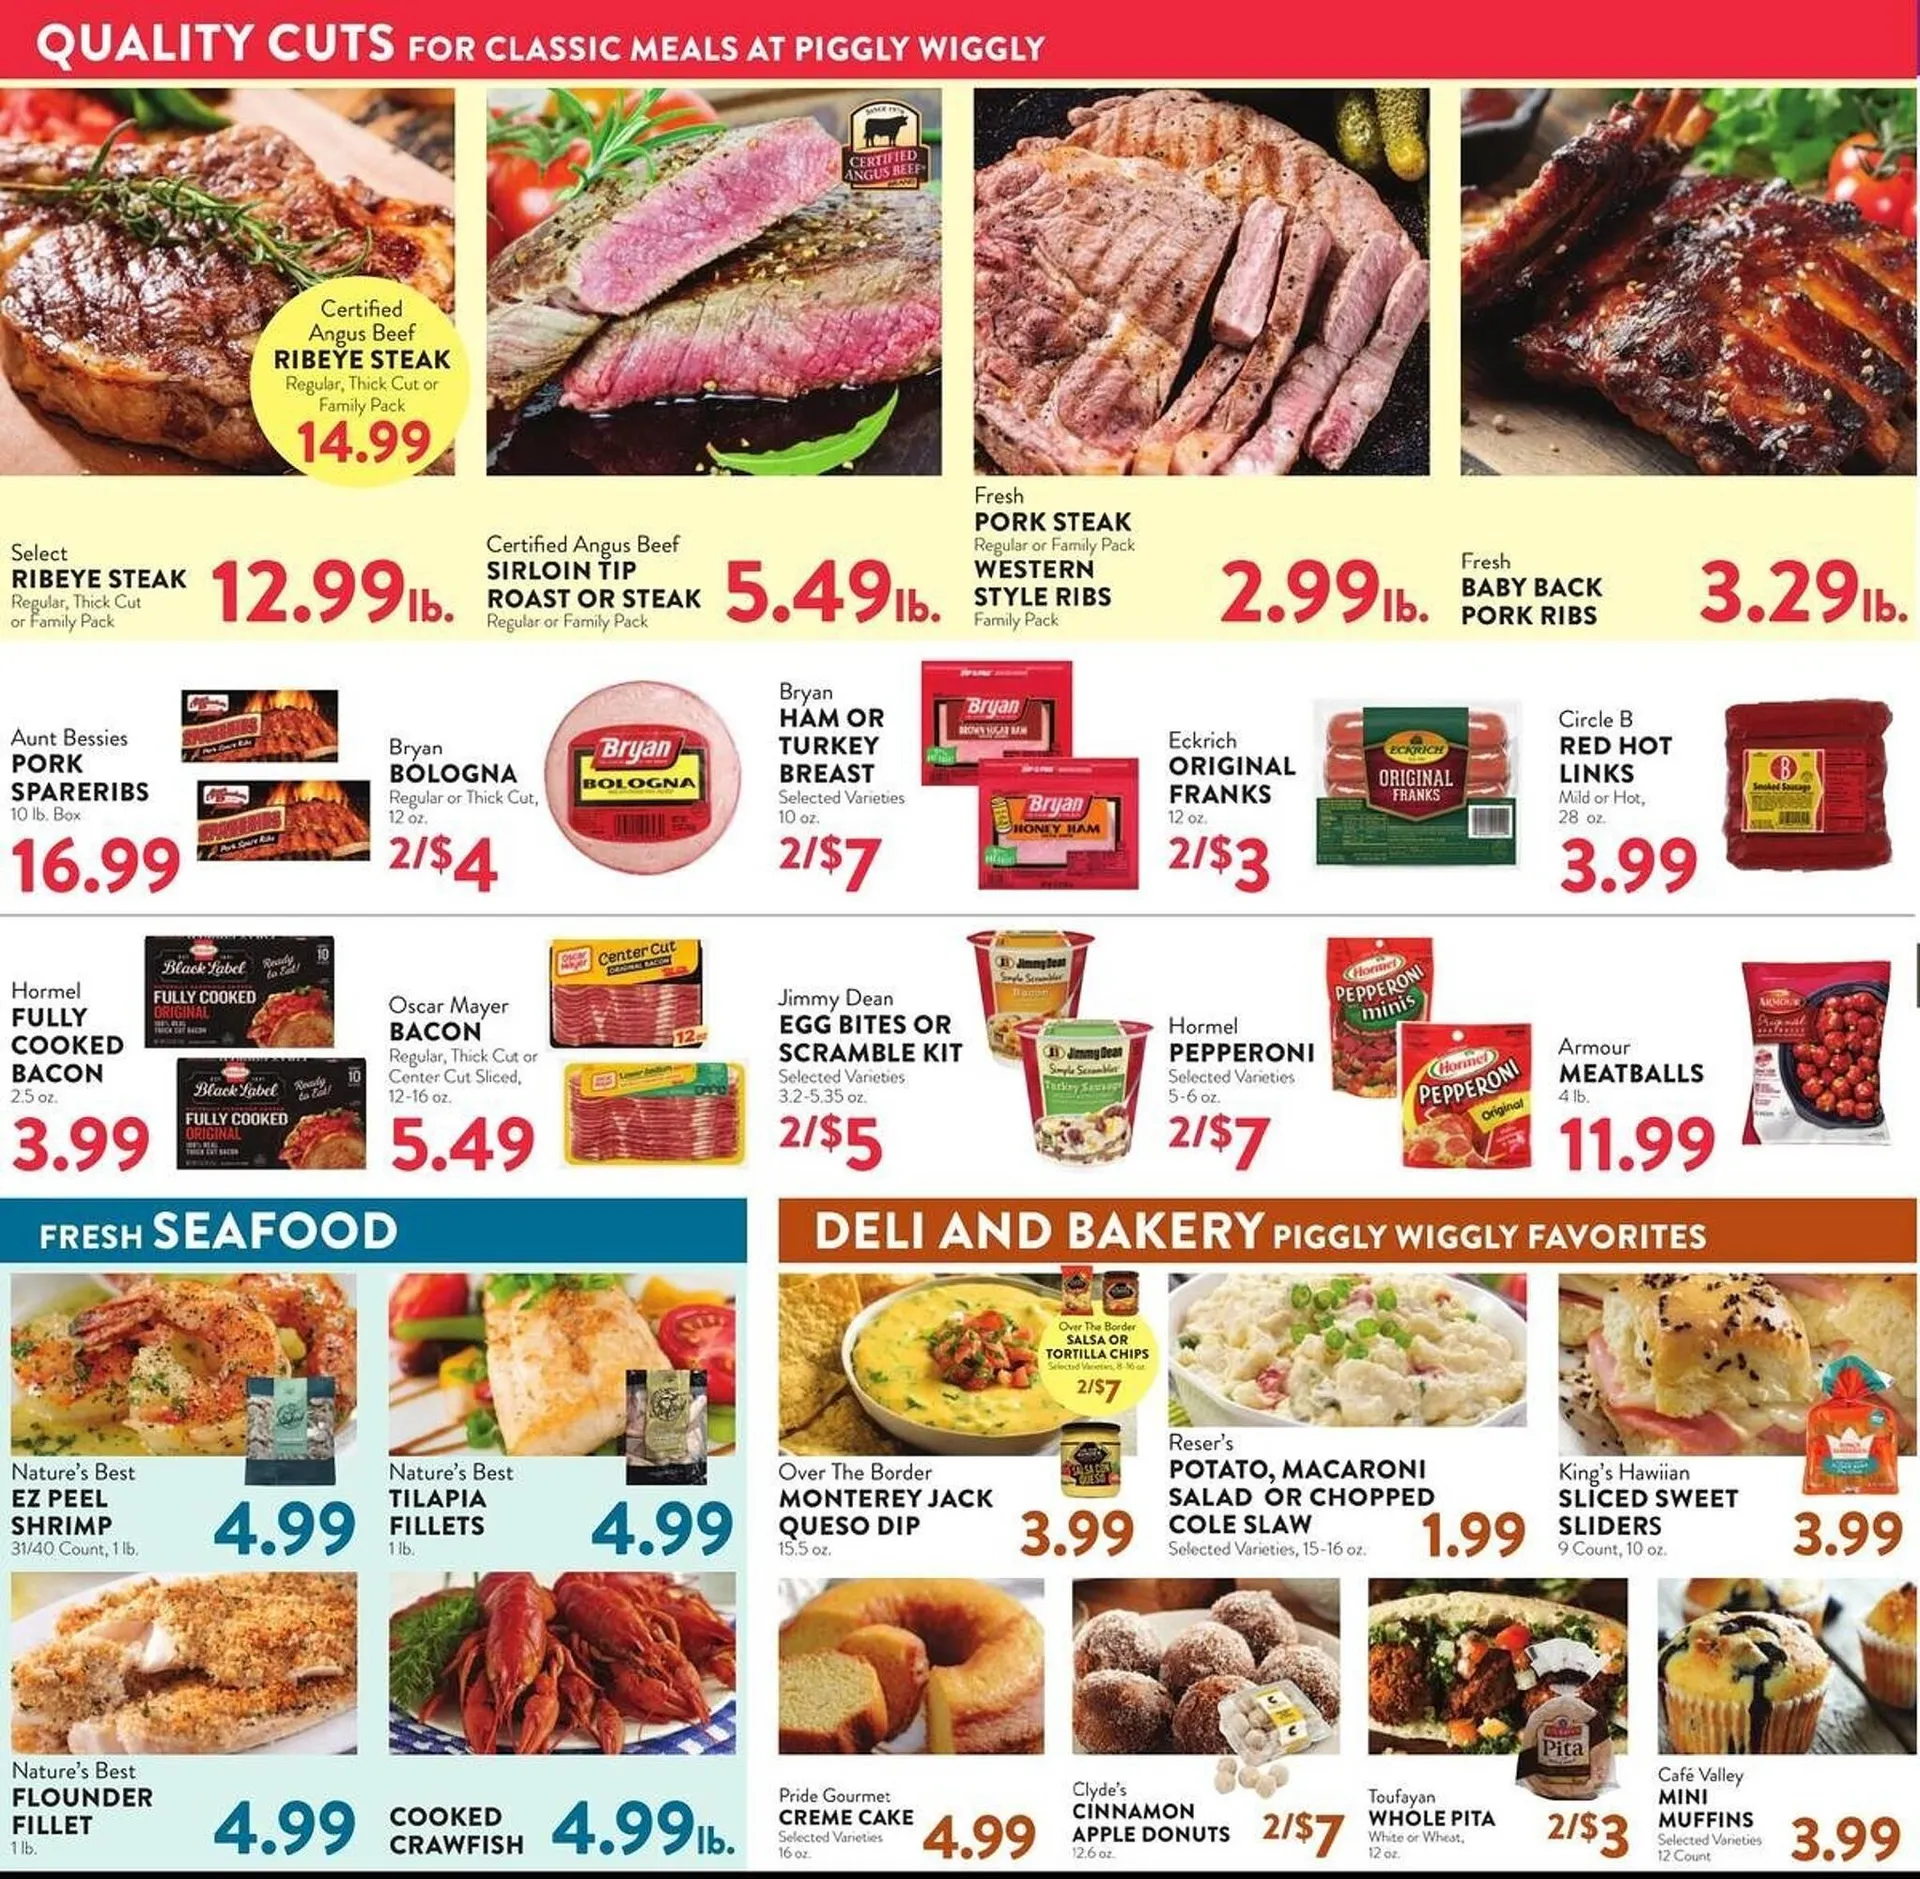 Piggly Wiggly Weekly Ad - 2